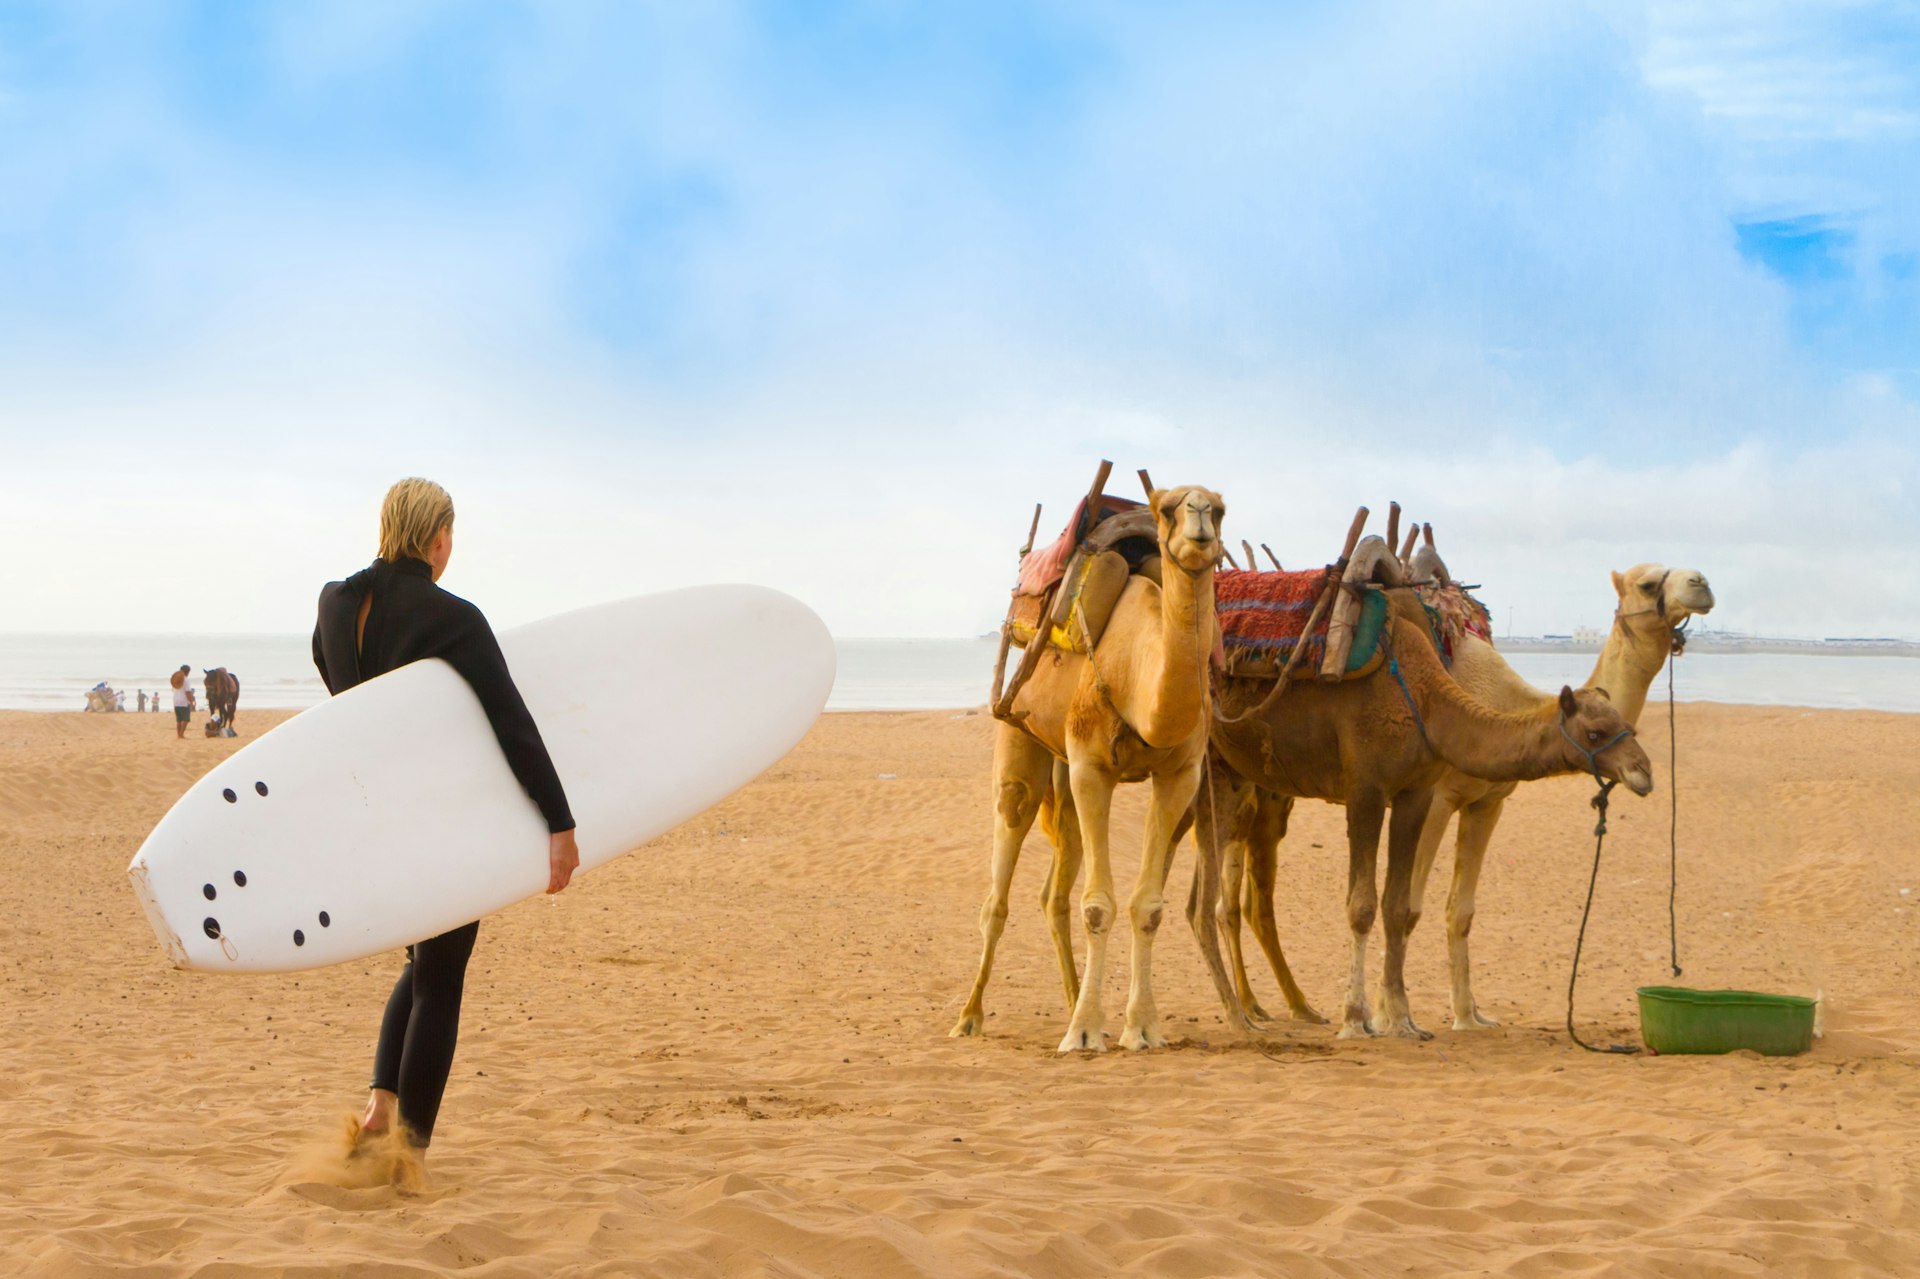 A woman with a surfboard stands in the beach in front of camels in Essaouira, Morocco